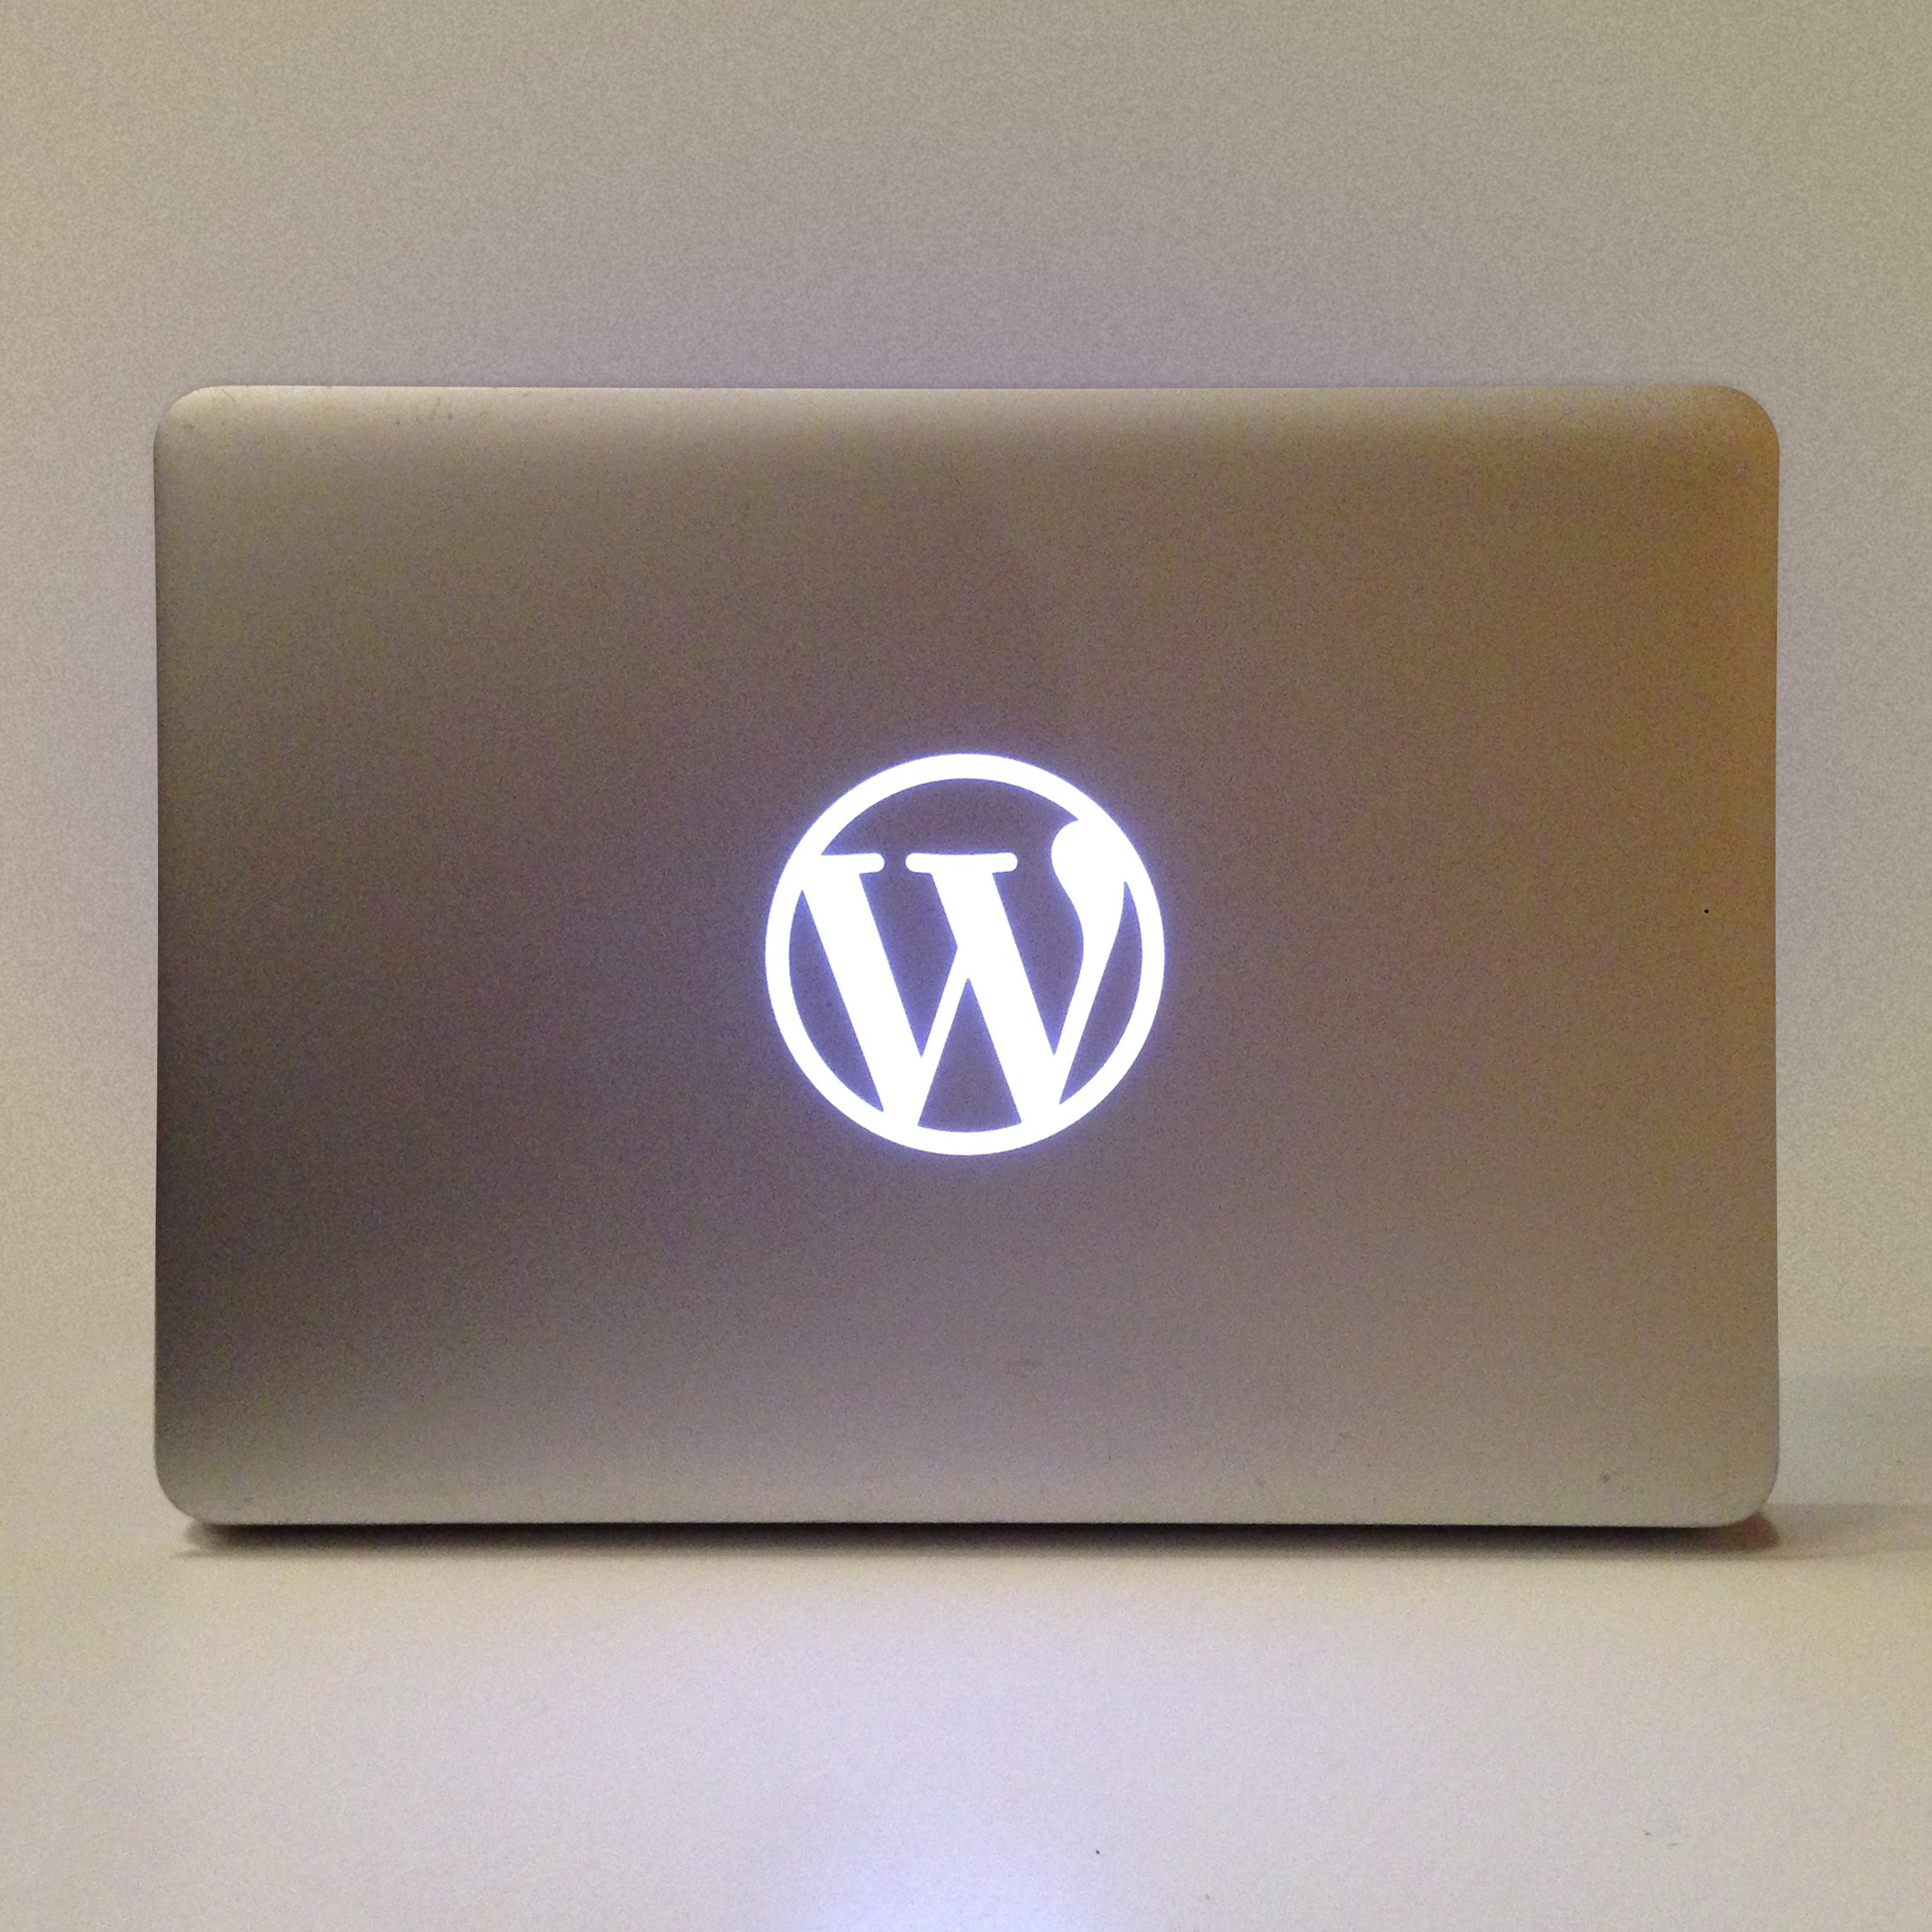 Photo of a customized Macbook Pro, 2012 edition, with the WordPress logo